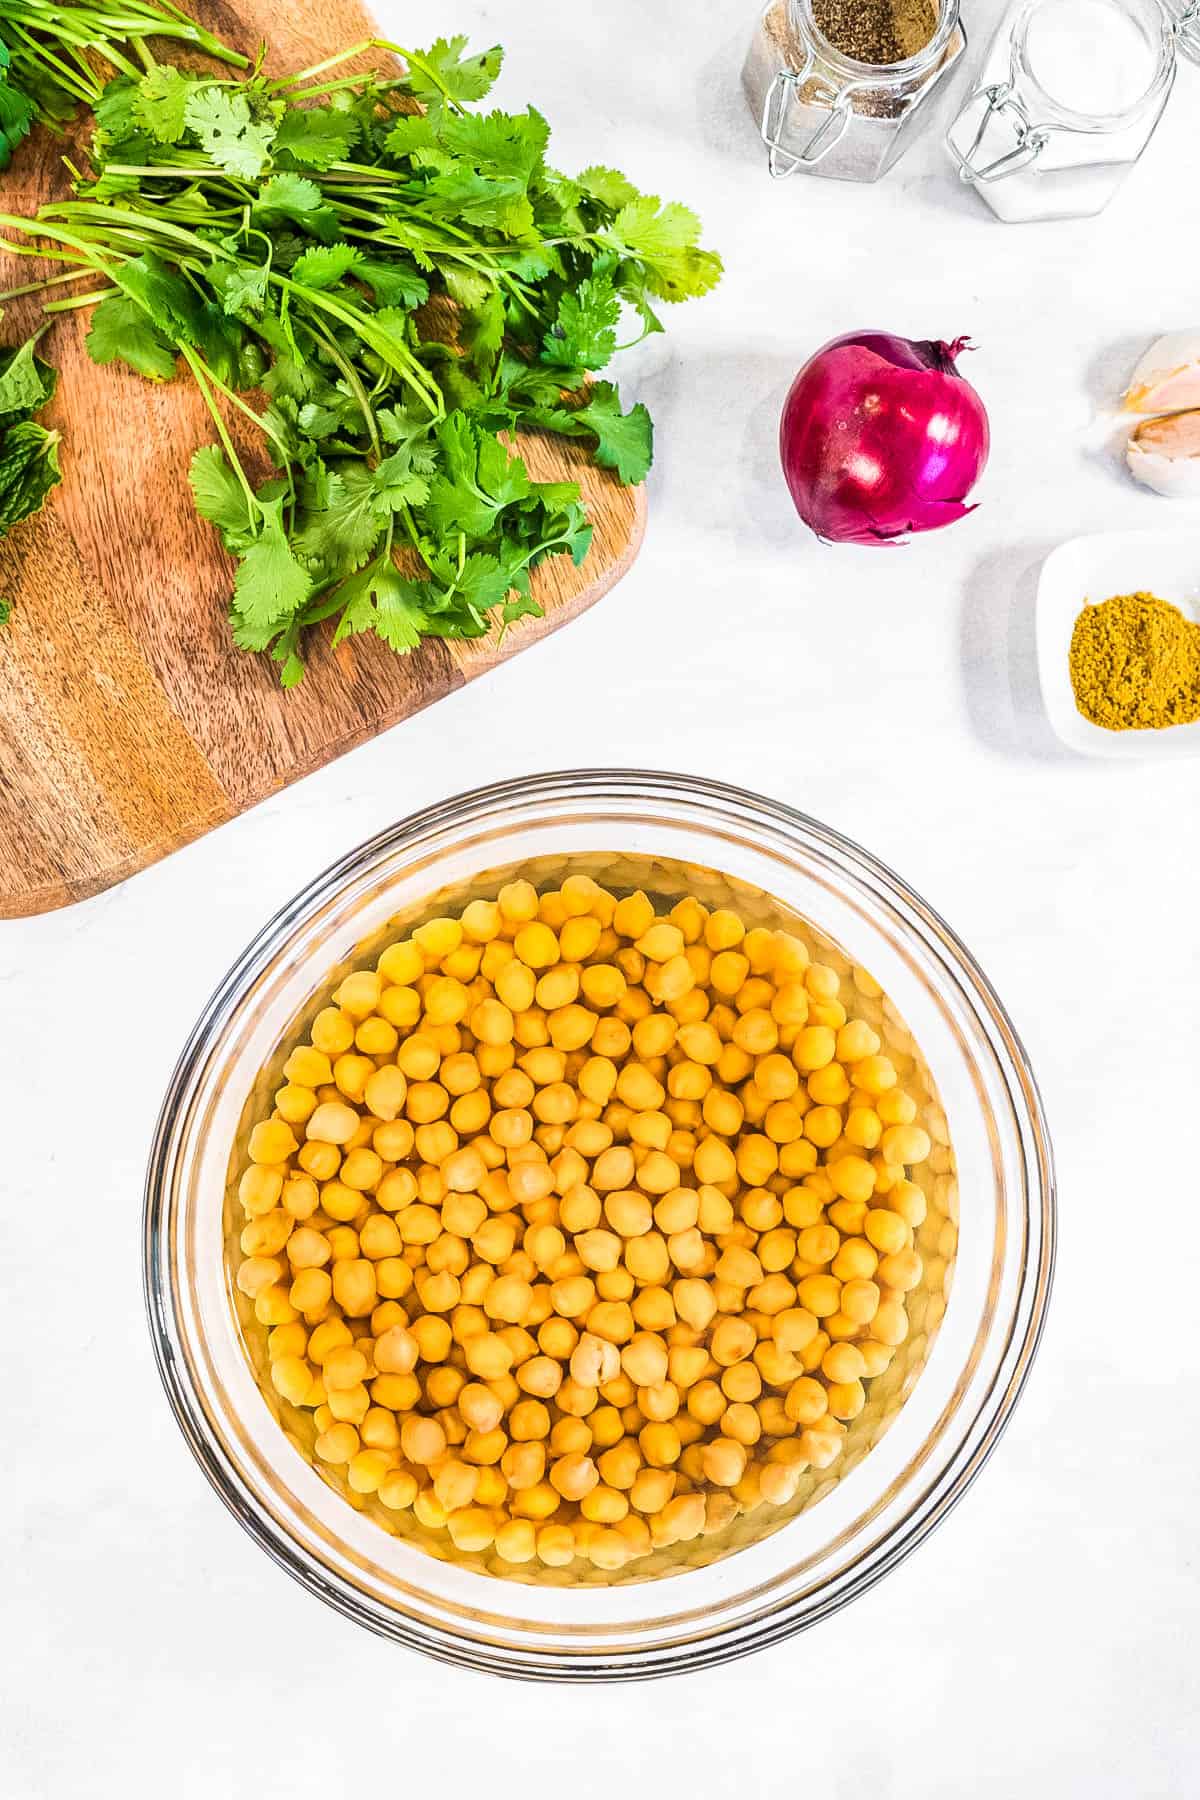 Chickpeas used for an air fryer recipe displayed in a glass bowl on a cutting board.